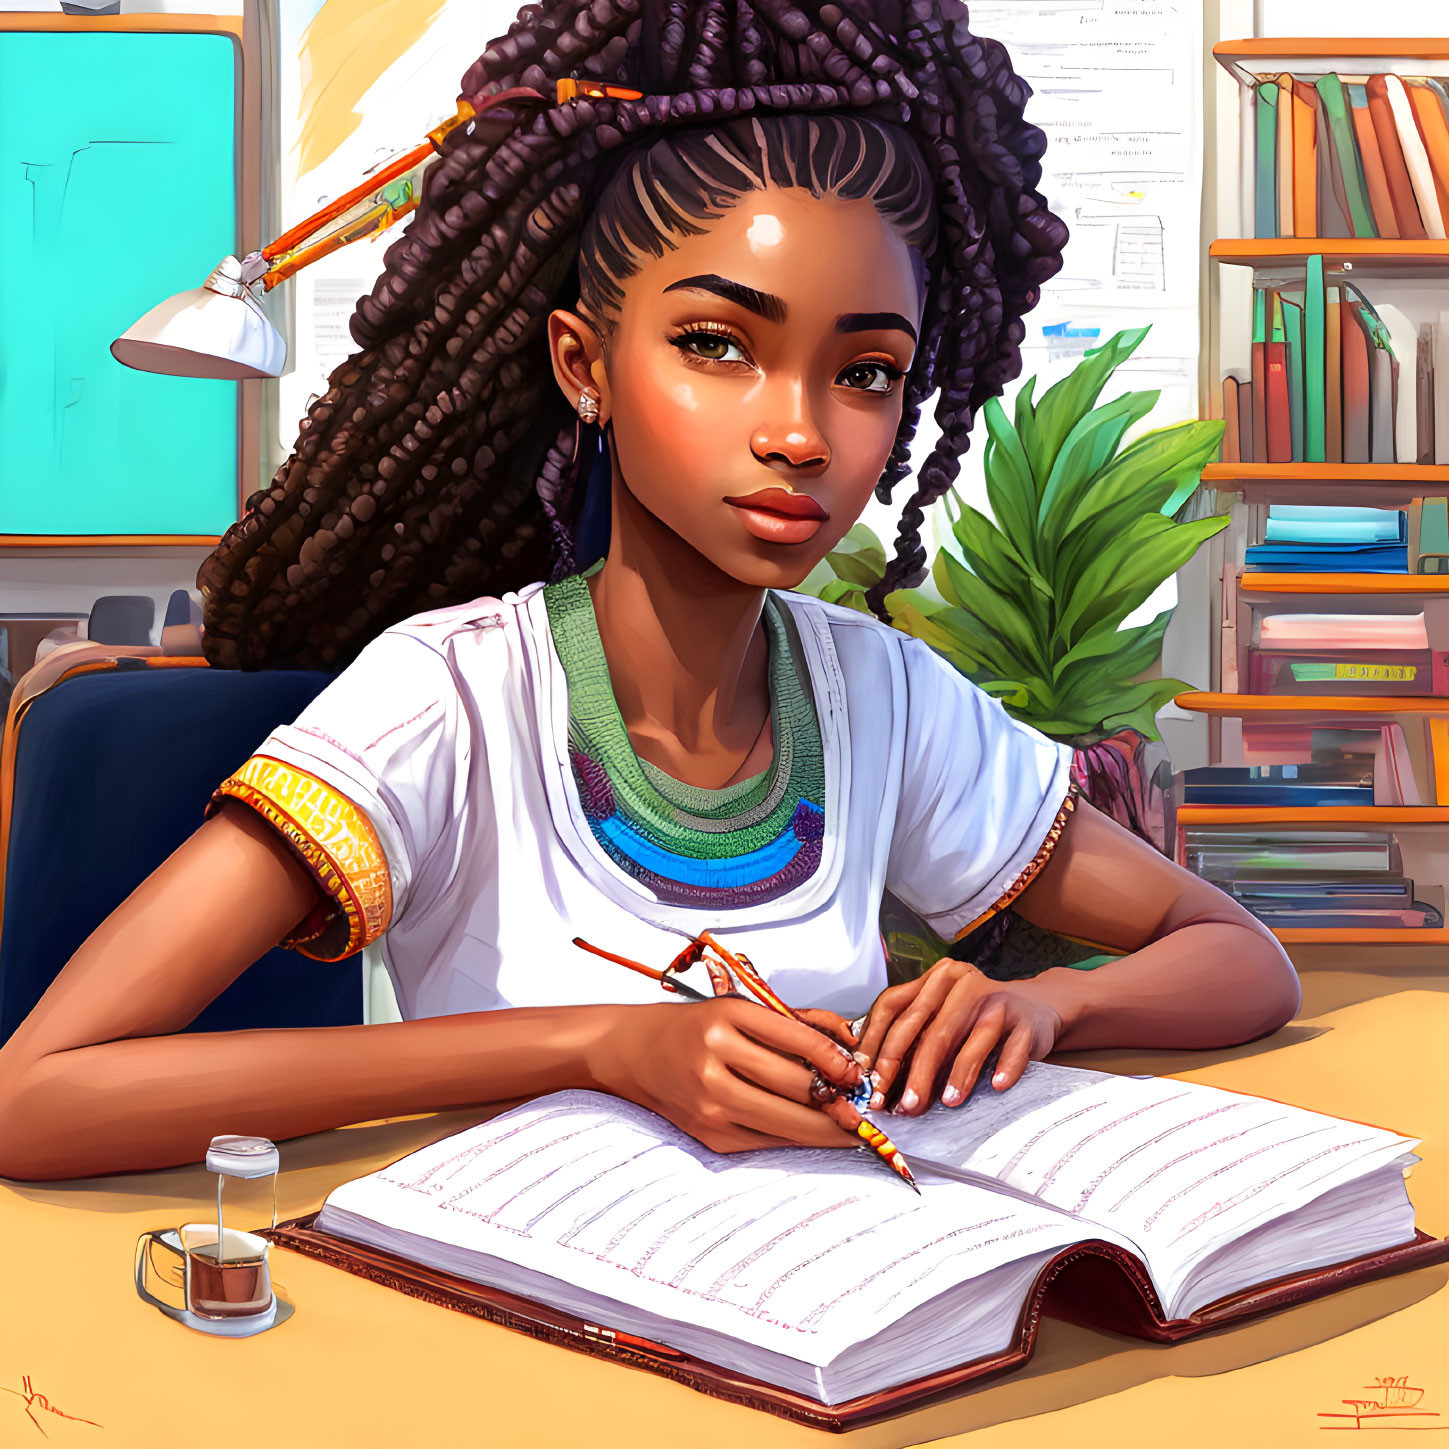 Young woman with braided hair writing at desk surrounded by books and plant